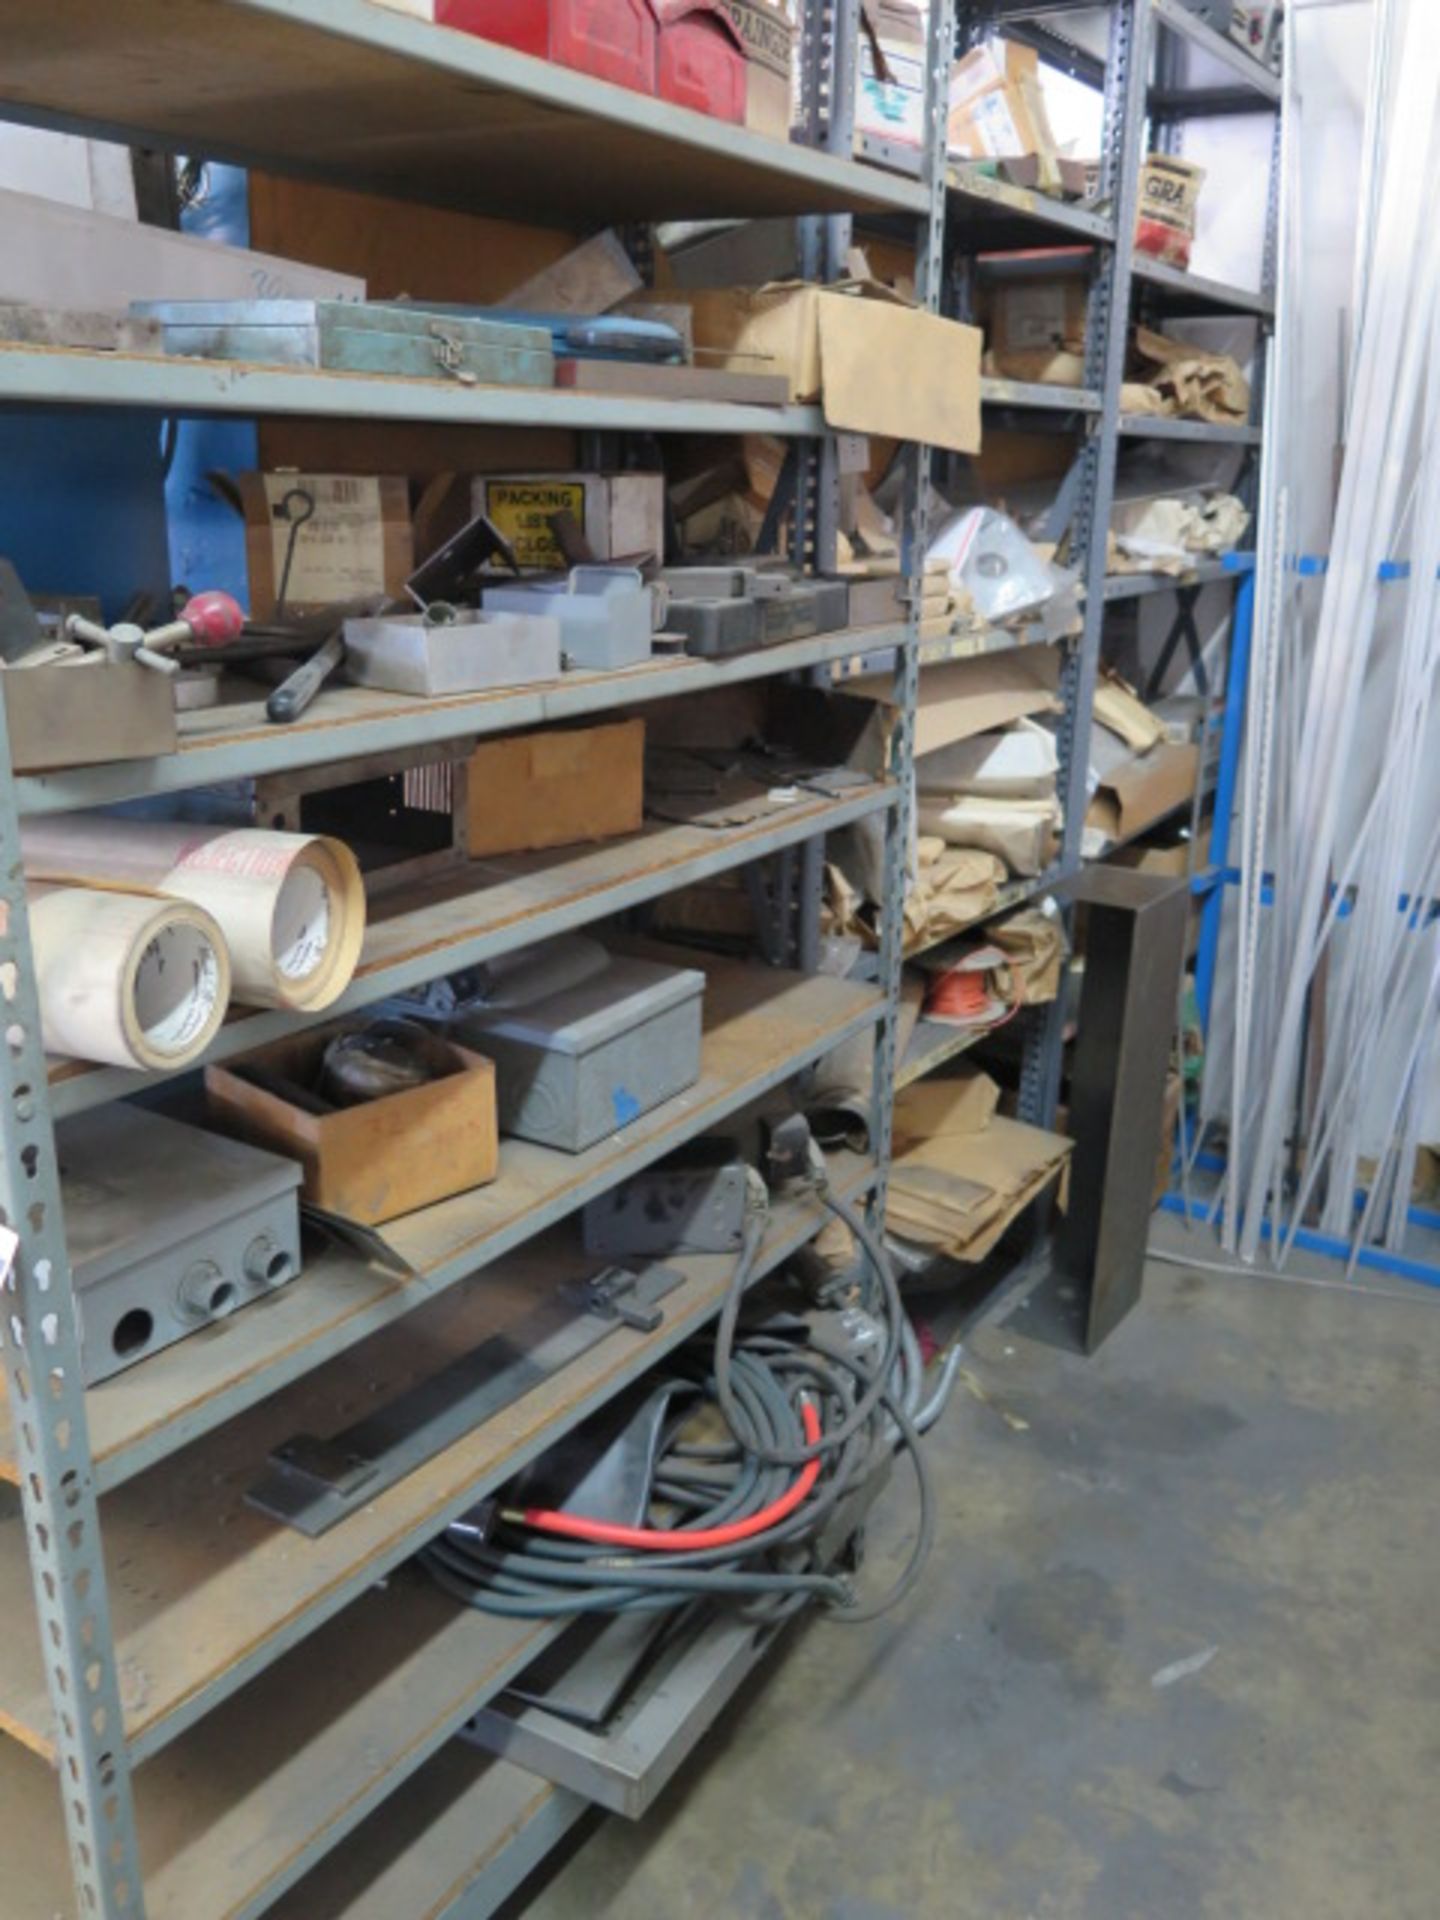 Shelves w/ Misc Tooling and Parts